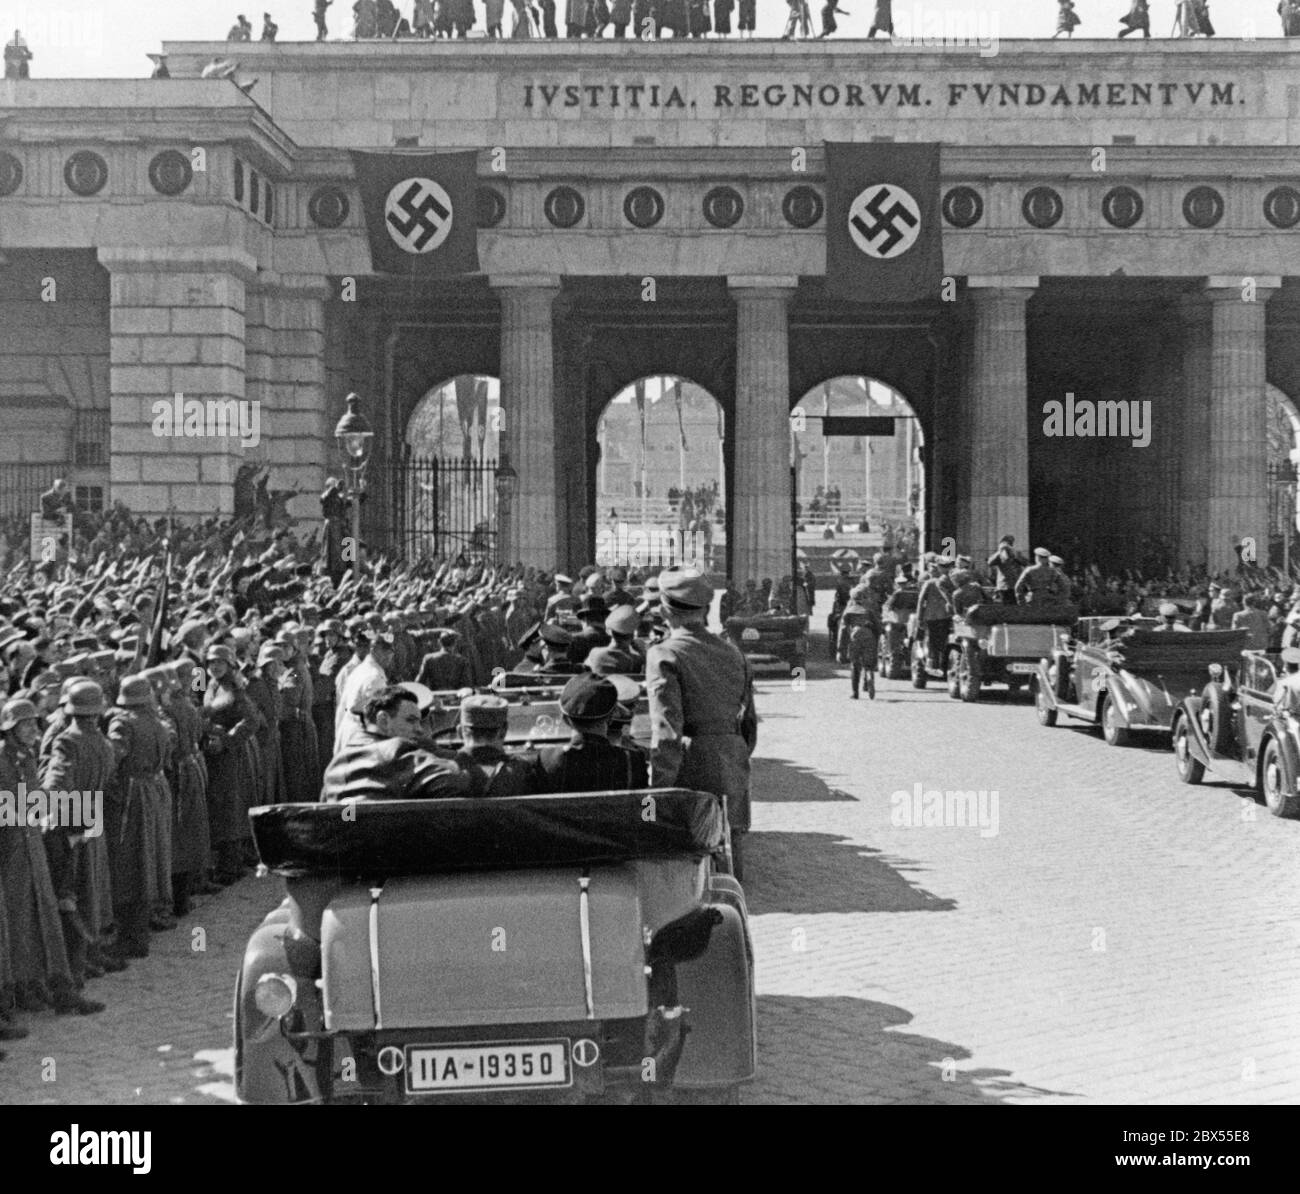 Adolf Hitler enters the Heldenplatz in Vienna with his convoy through the Outer Castle Gate. There he announces the annexation of Austria to the German Reich. On the gate is written: Iustitia Regnorum Fundamentum (Justice is the basis of the rule / kingdom). Stock Photo